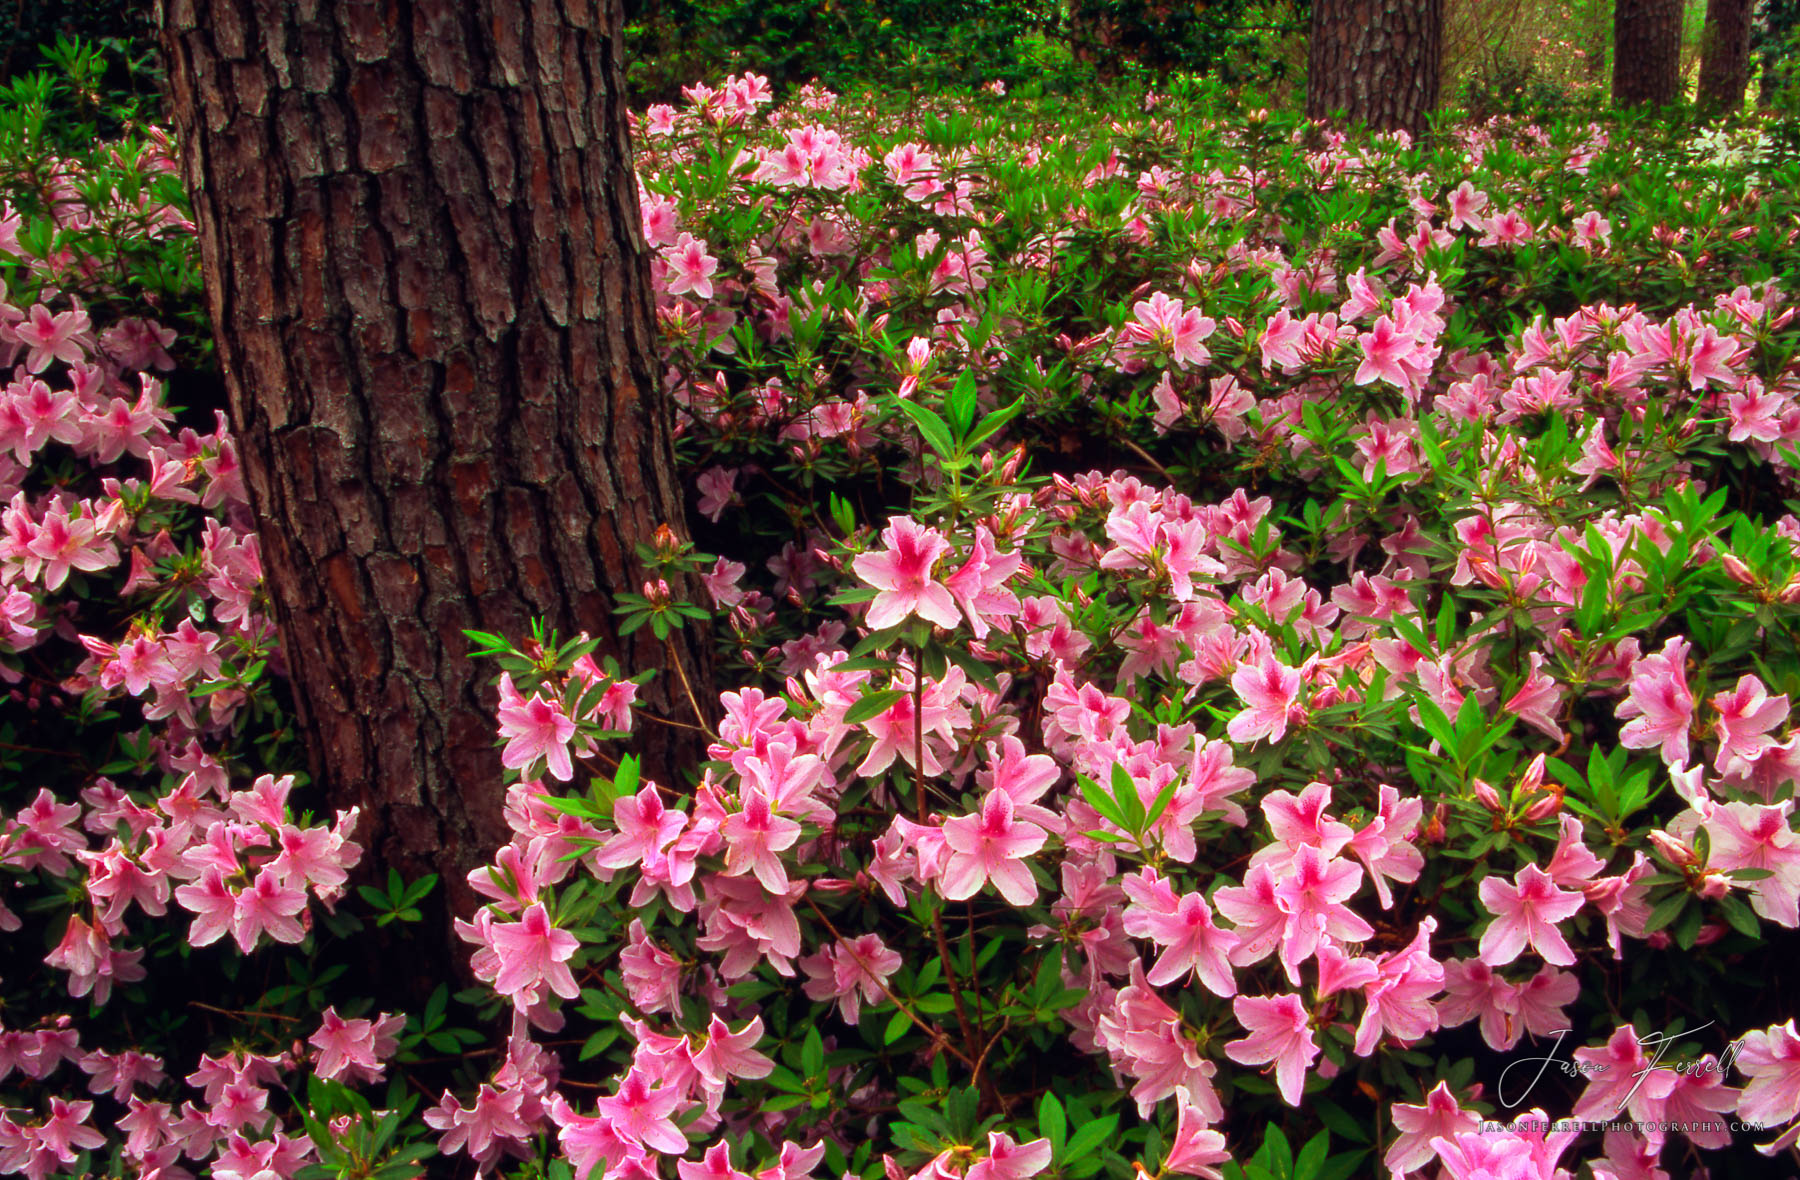 Plant enthusiasts have selectively bred azaleas for hundreds of years. This human selection has produced over 10,000 different...